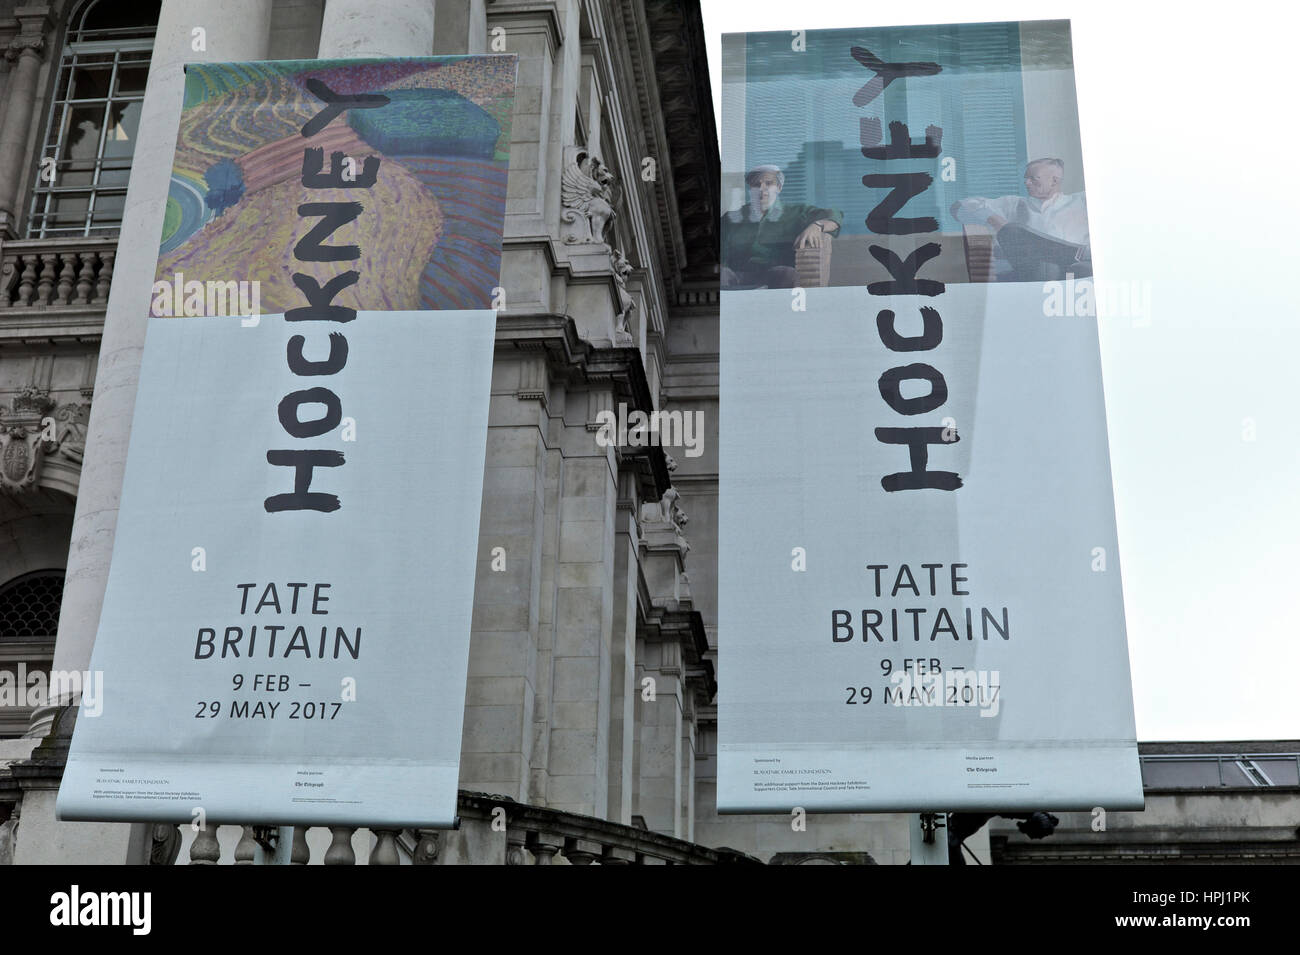 La Tate Britain museum and art gallery organise une exposition David Hockney Banque D'Images